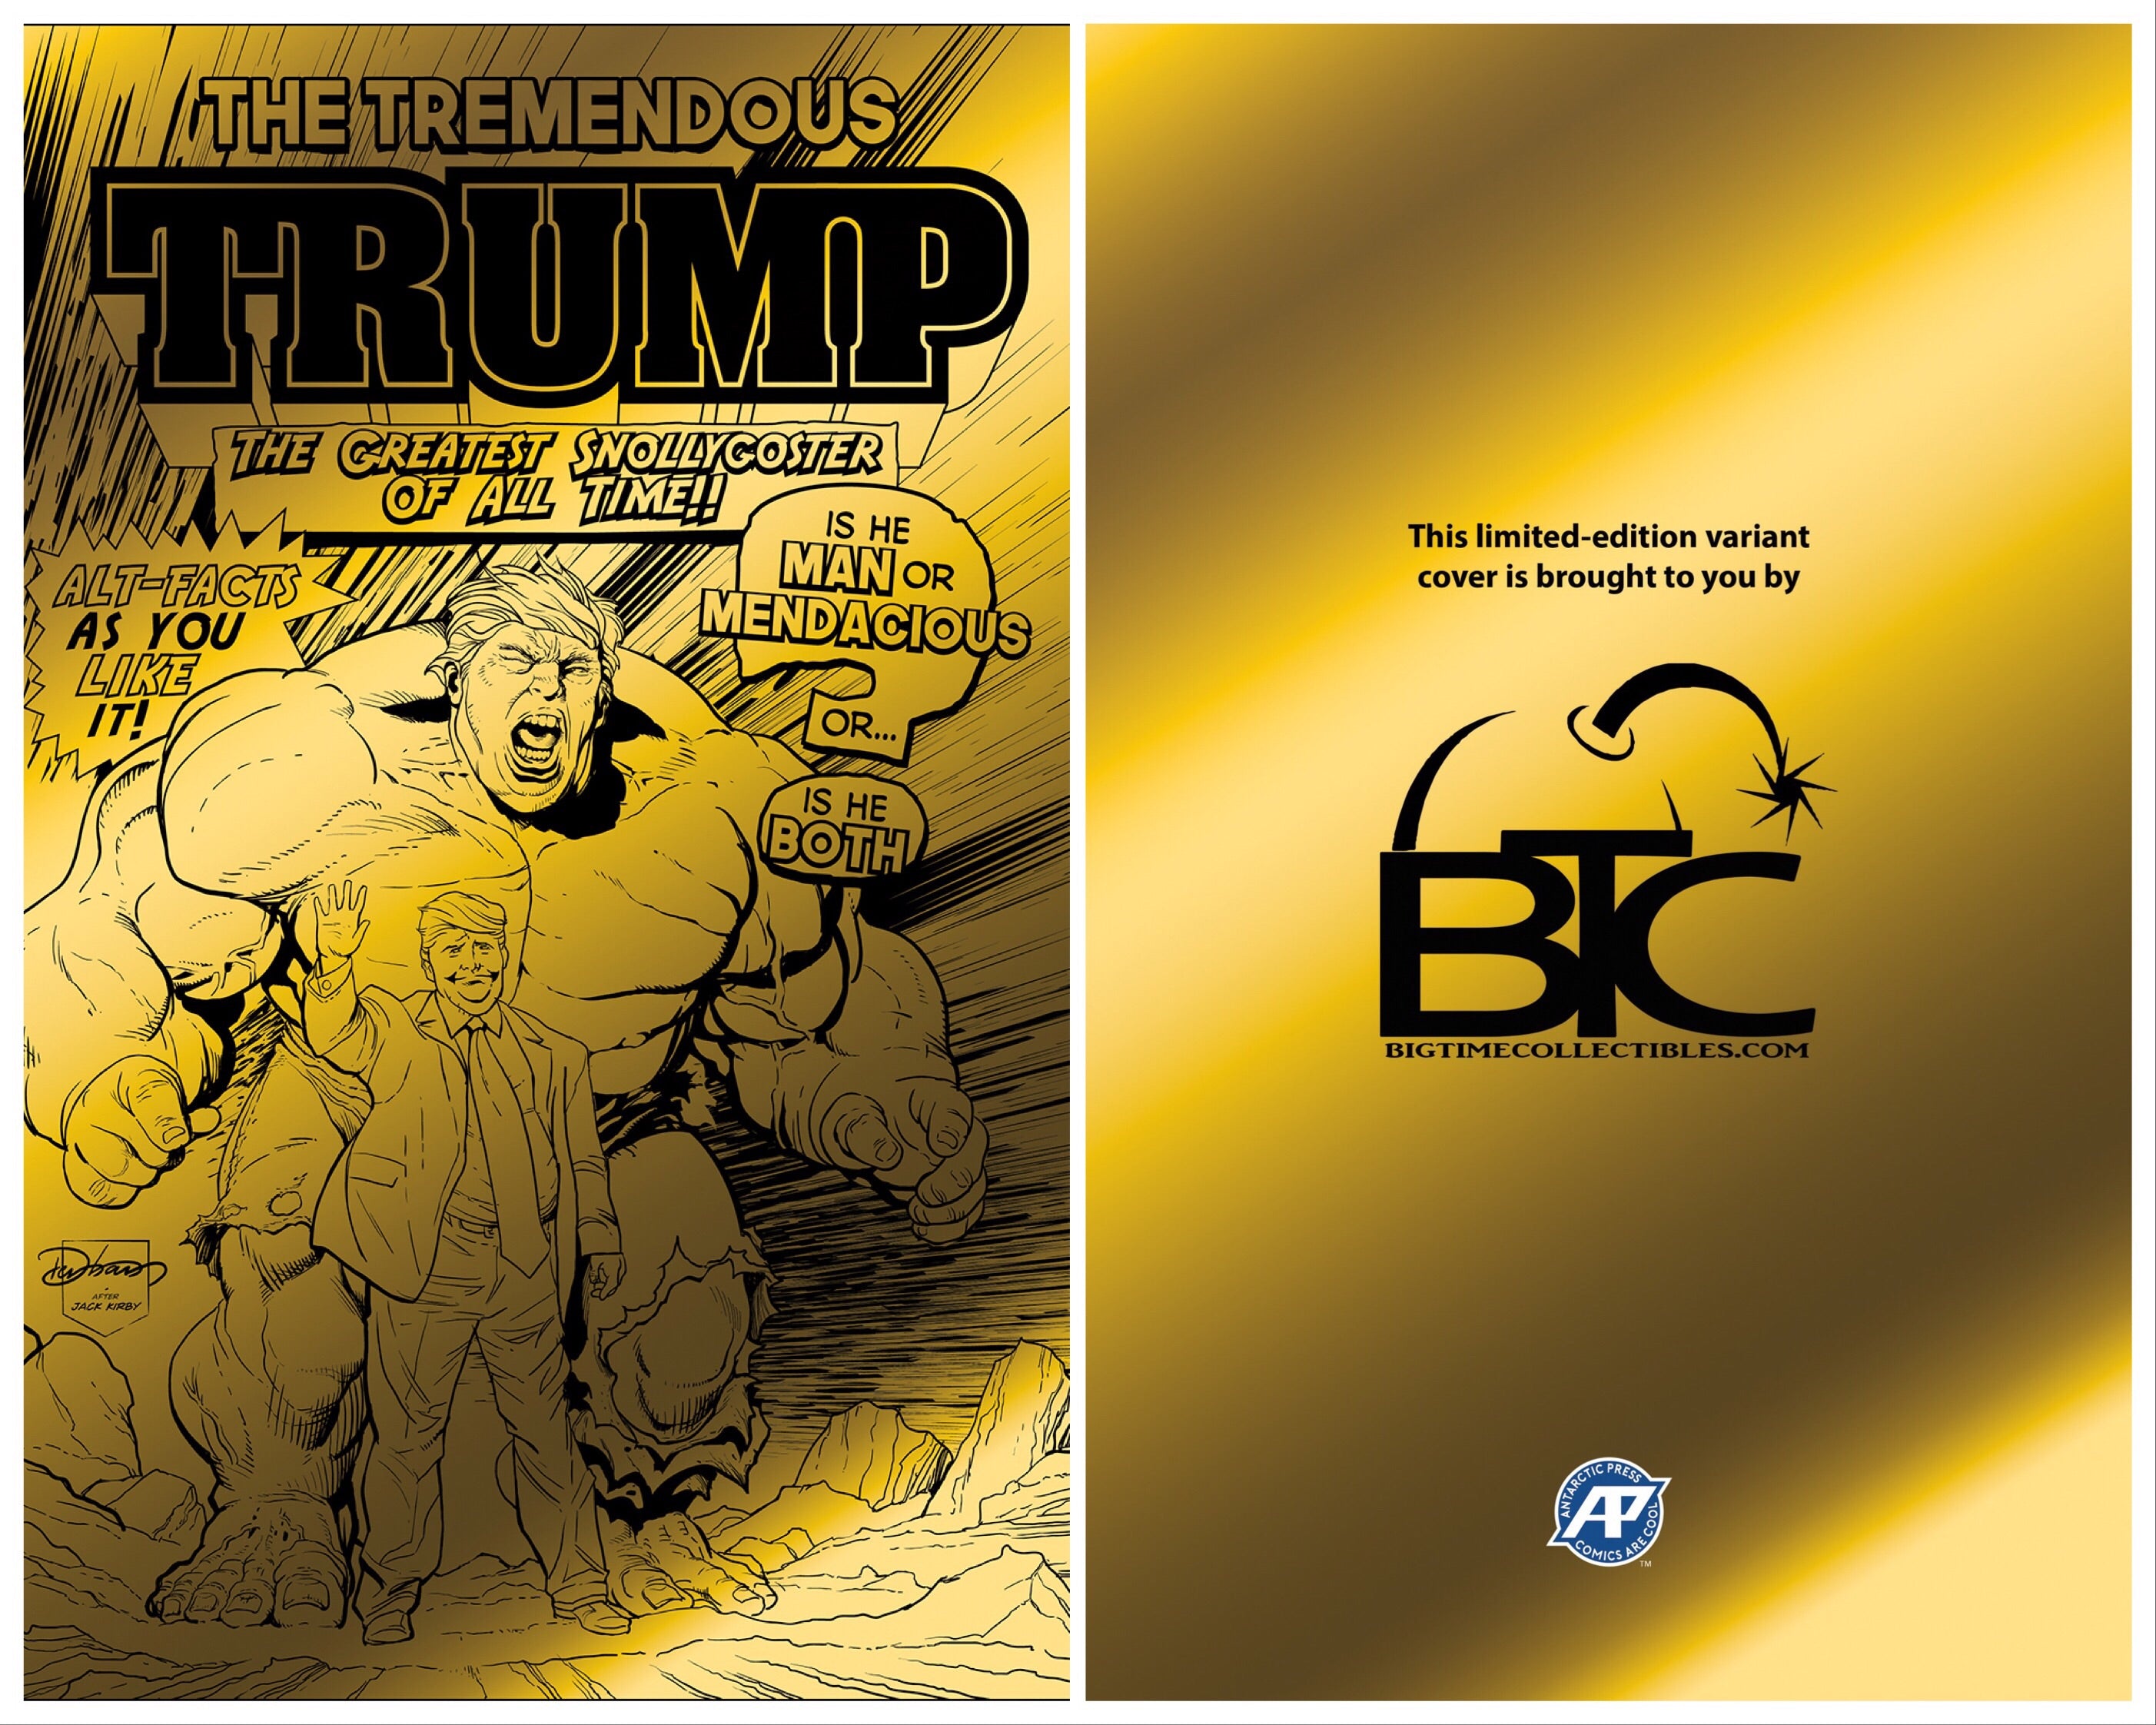 TREMENDOUS TRUMP BTC GOLD, SILVER, RED AND BLACK FOIL EXCLUSIVE COVERS